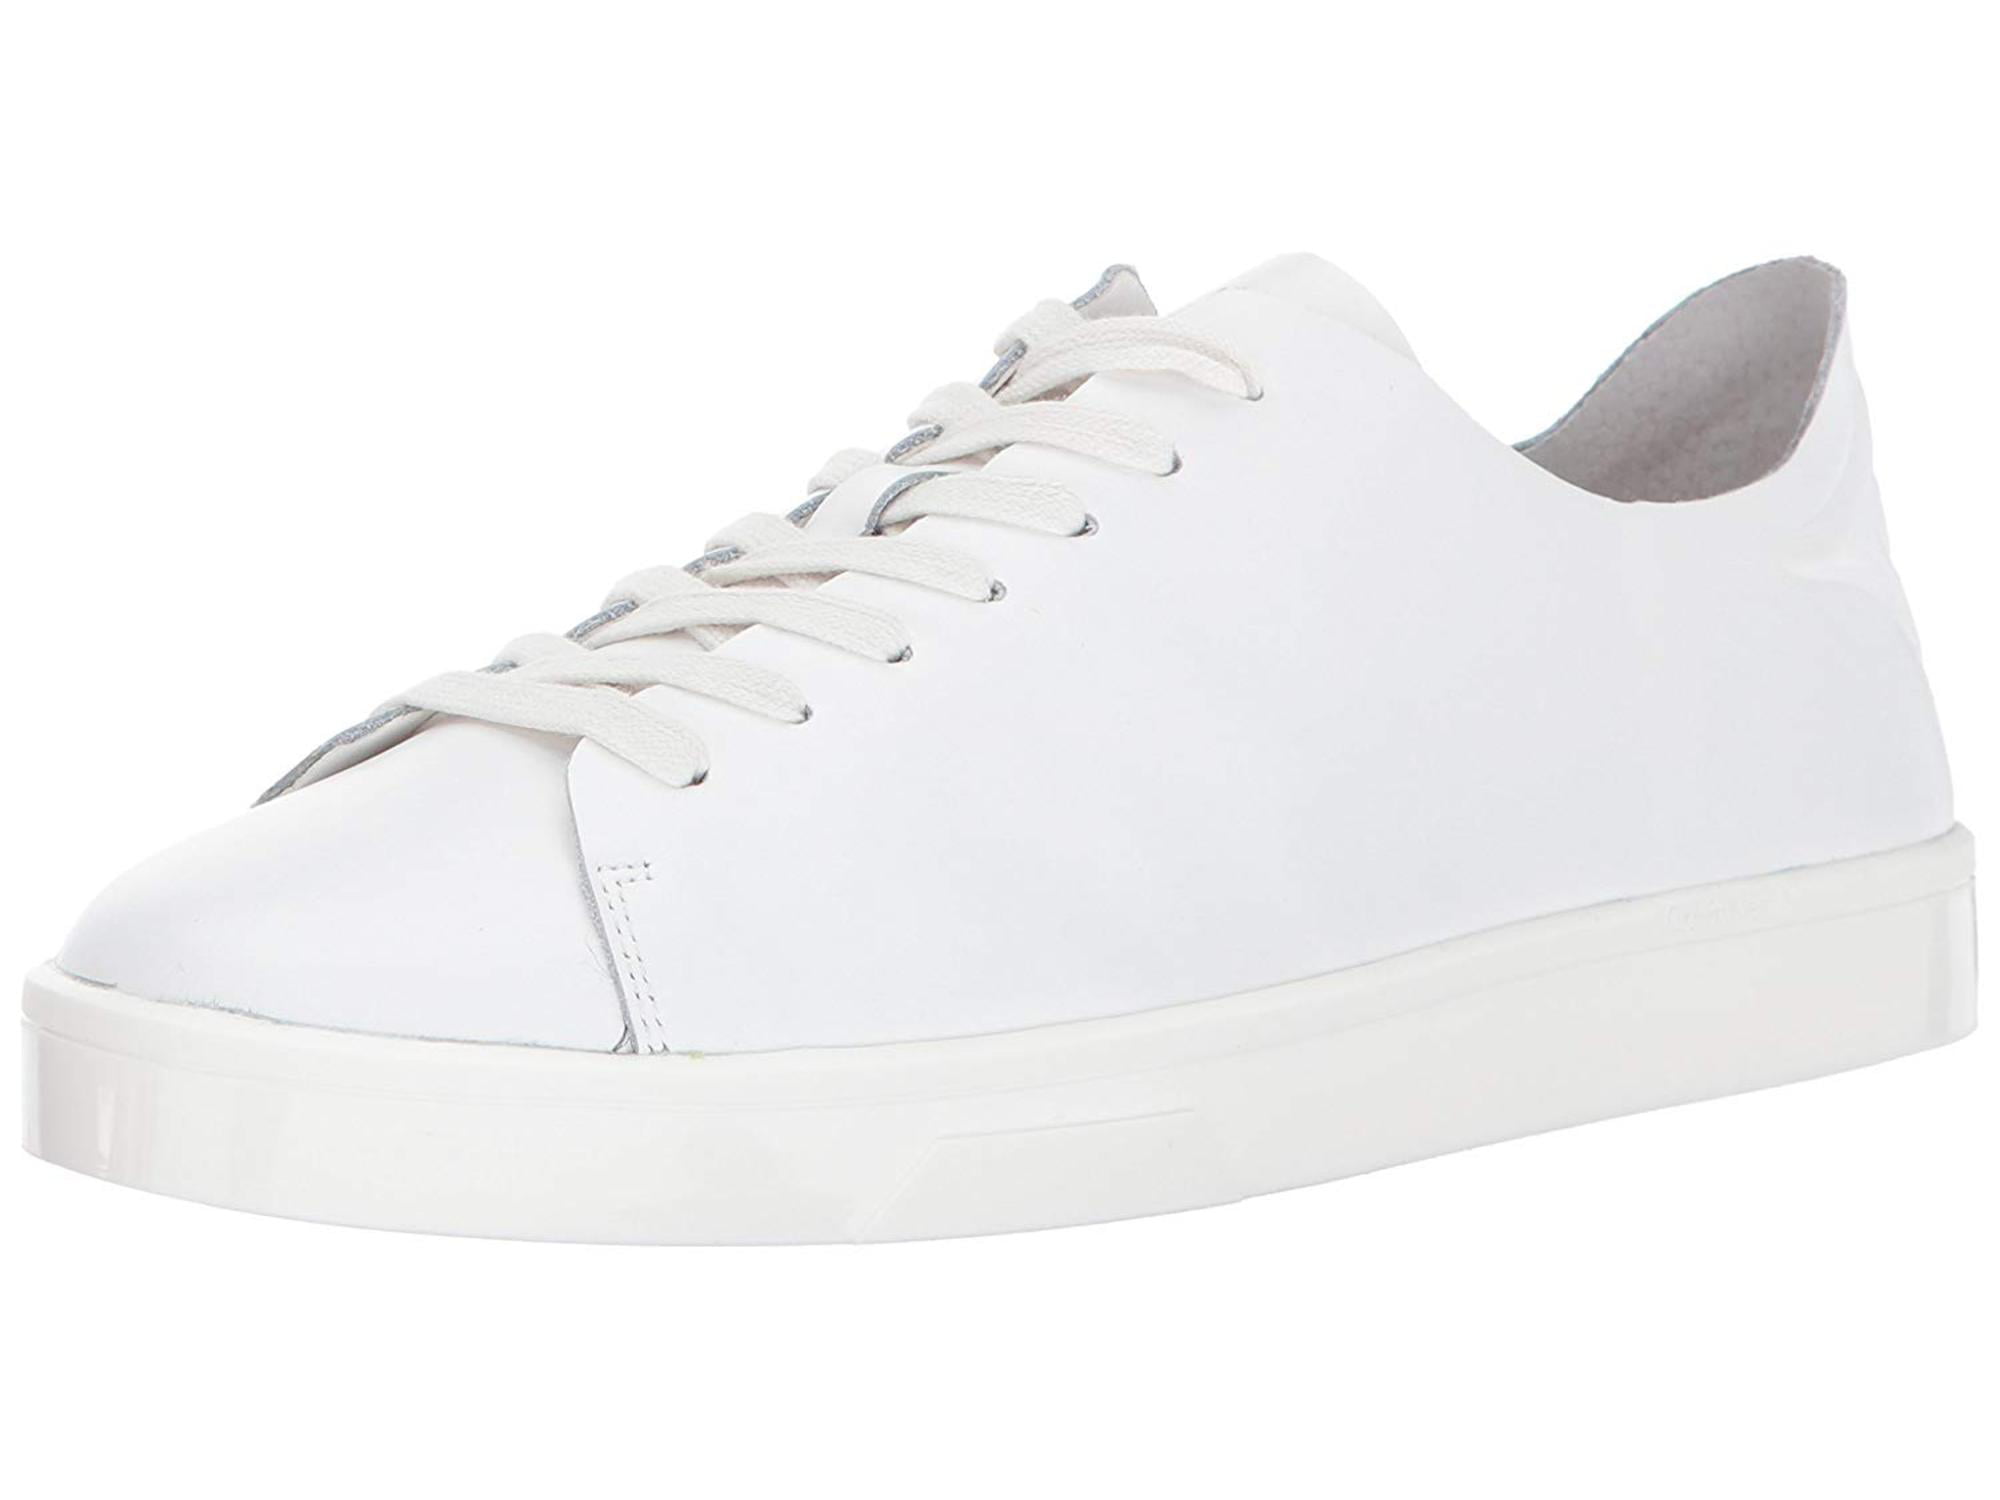 Calvin Klein Womens Irena Fabric Low Top Lace Up Fashion Sneakers ...